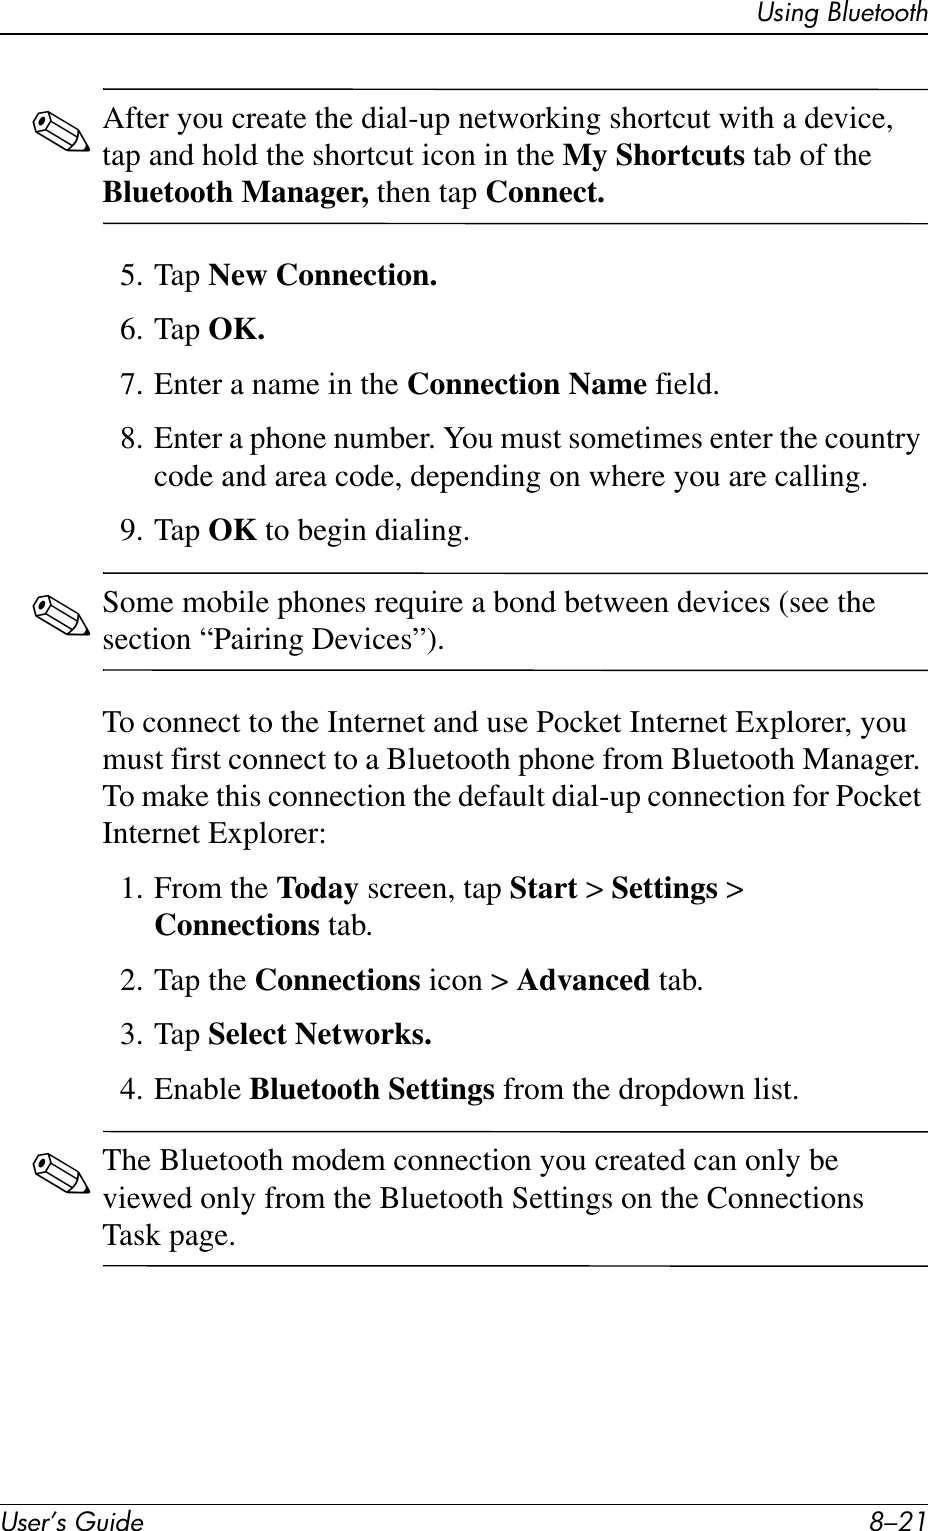 Using BluetoothUser’s Guide 8–21✎After you create the dial-up networking shortcut with a device, tap and hold the shortcut icon in the My Shortcuts tab of the Bluetooth Manager, then tap Connect.5. Tap New Connection.6. Tap OK.7. Enter a name in the Connection Name field.8. Enter a phone number. You must sometimes enter the country code and area code, depending on where you are calling.9. Tap OK to begin dialing.✎Some mobile phones require a bond between devices (see the section “Pairing Devices”).To connect to the Internet and use Pocket Internet Explorer, you must first connect to a Bluetooth phone from Bluetooth Manager. To make this connection the default dial-up connection for Pocket Internet Explorer:1. From the Today screen, tap Start &gt; Settings &gt; Connections tab.2. Tap the Connections icon &gt; Advanced tab.3. Tap Select Networks.4. Enable Bluetooth Settings from the dropdown list.✎The Bluetooth modem connection you created can only be viewed only from the Bluetooth Settings on the Connections Task page.